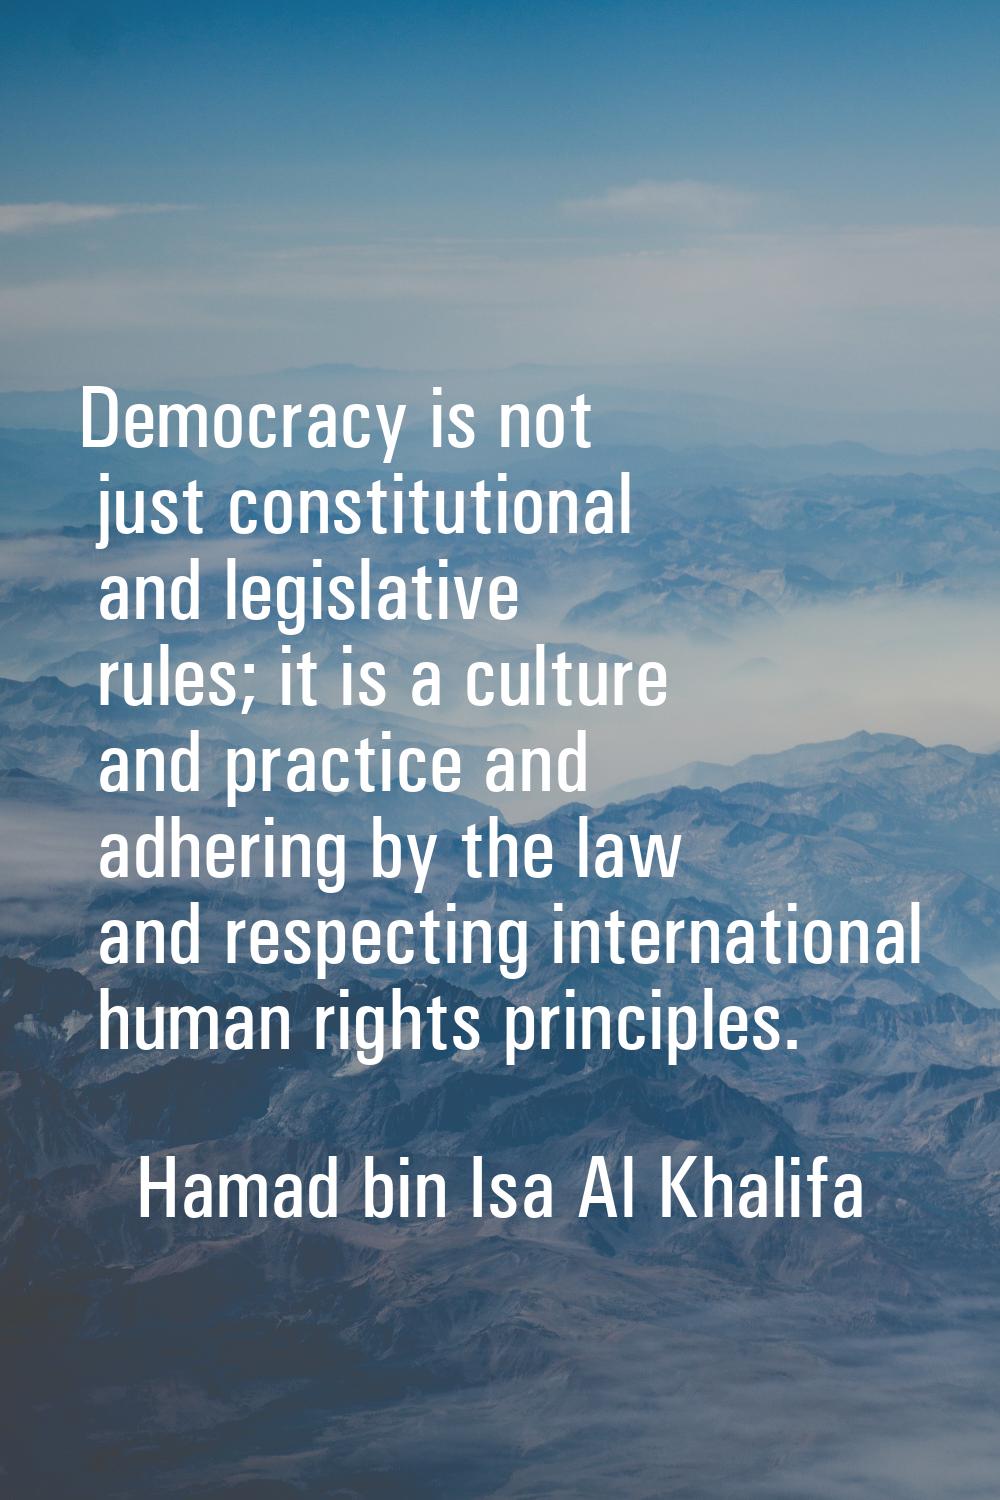 Democracy is not just constitutional and legislative rules; it is a culture and practice and adheri